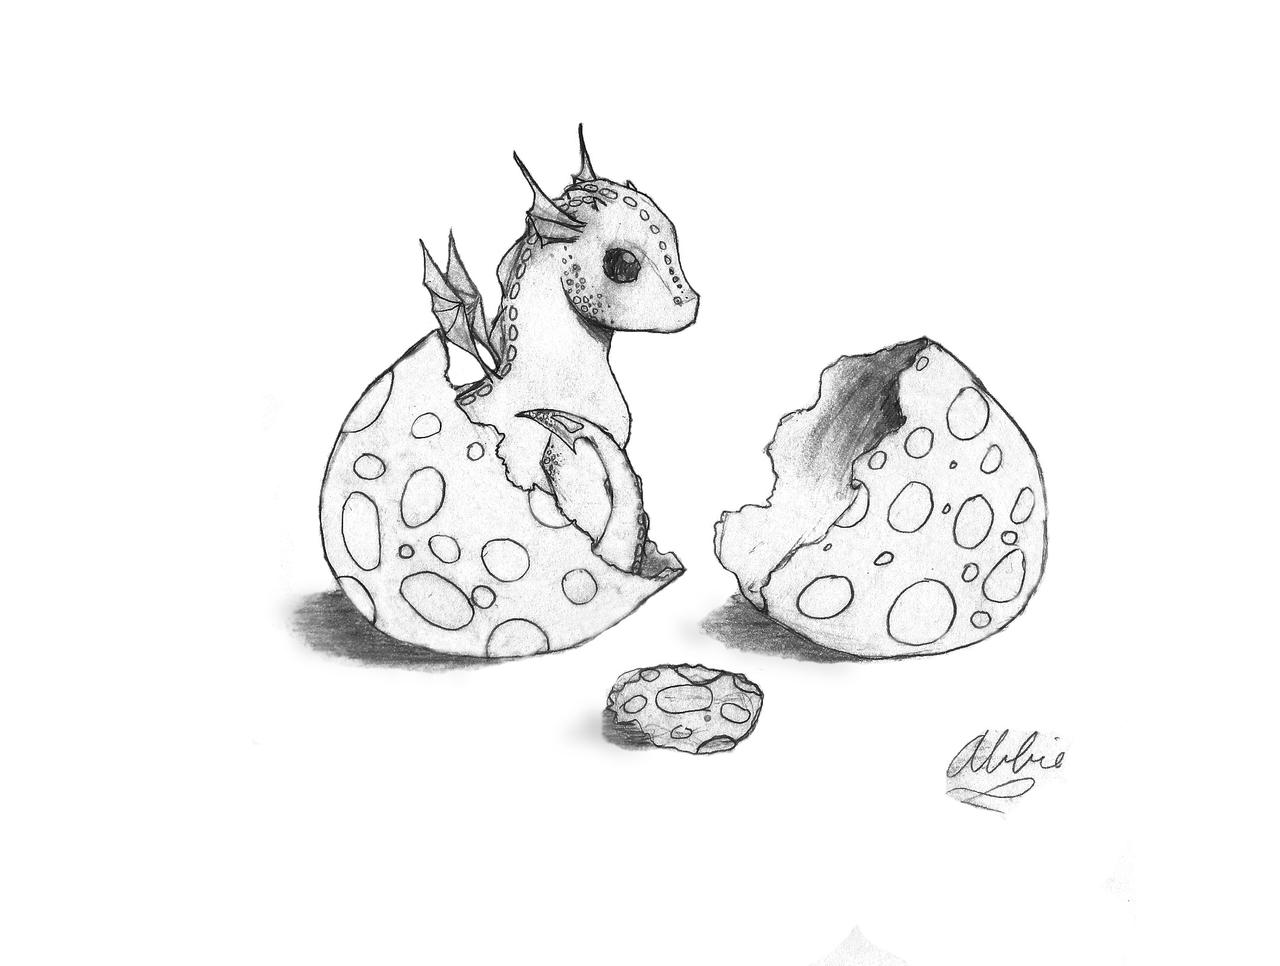 drawings of baby dragons hatching